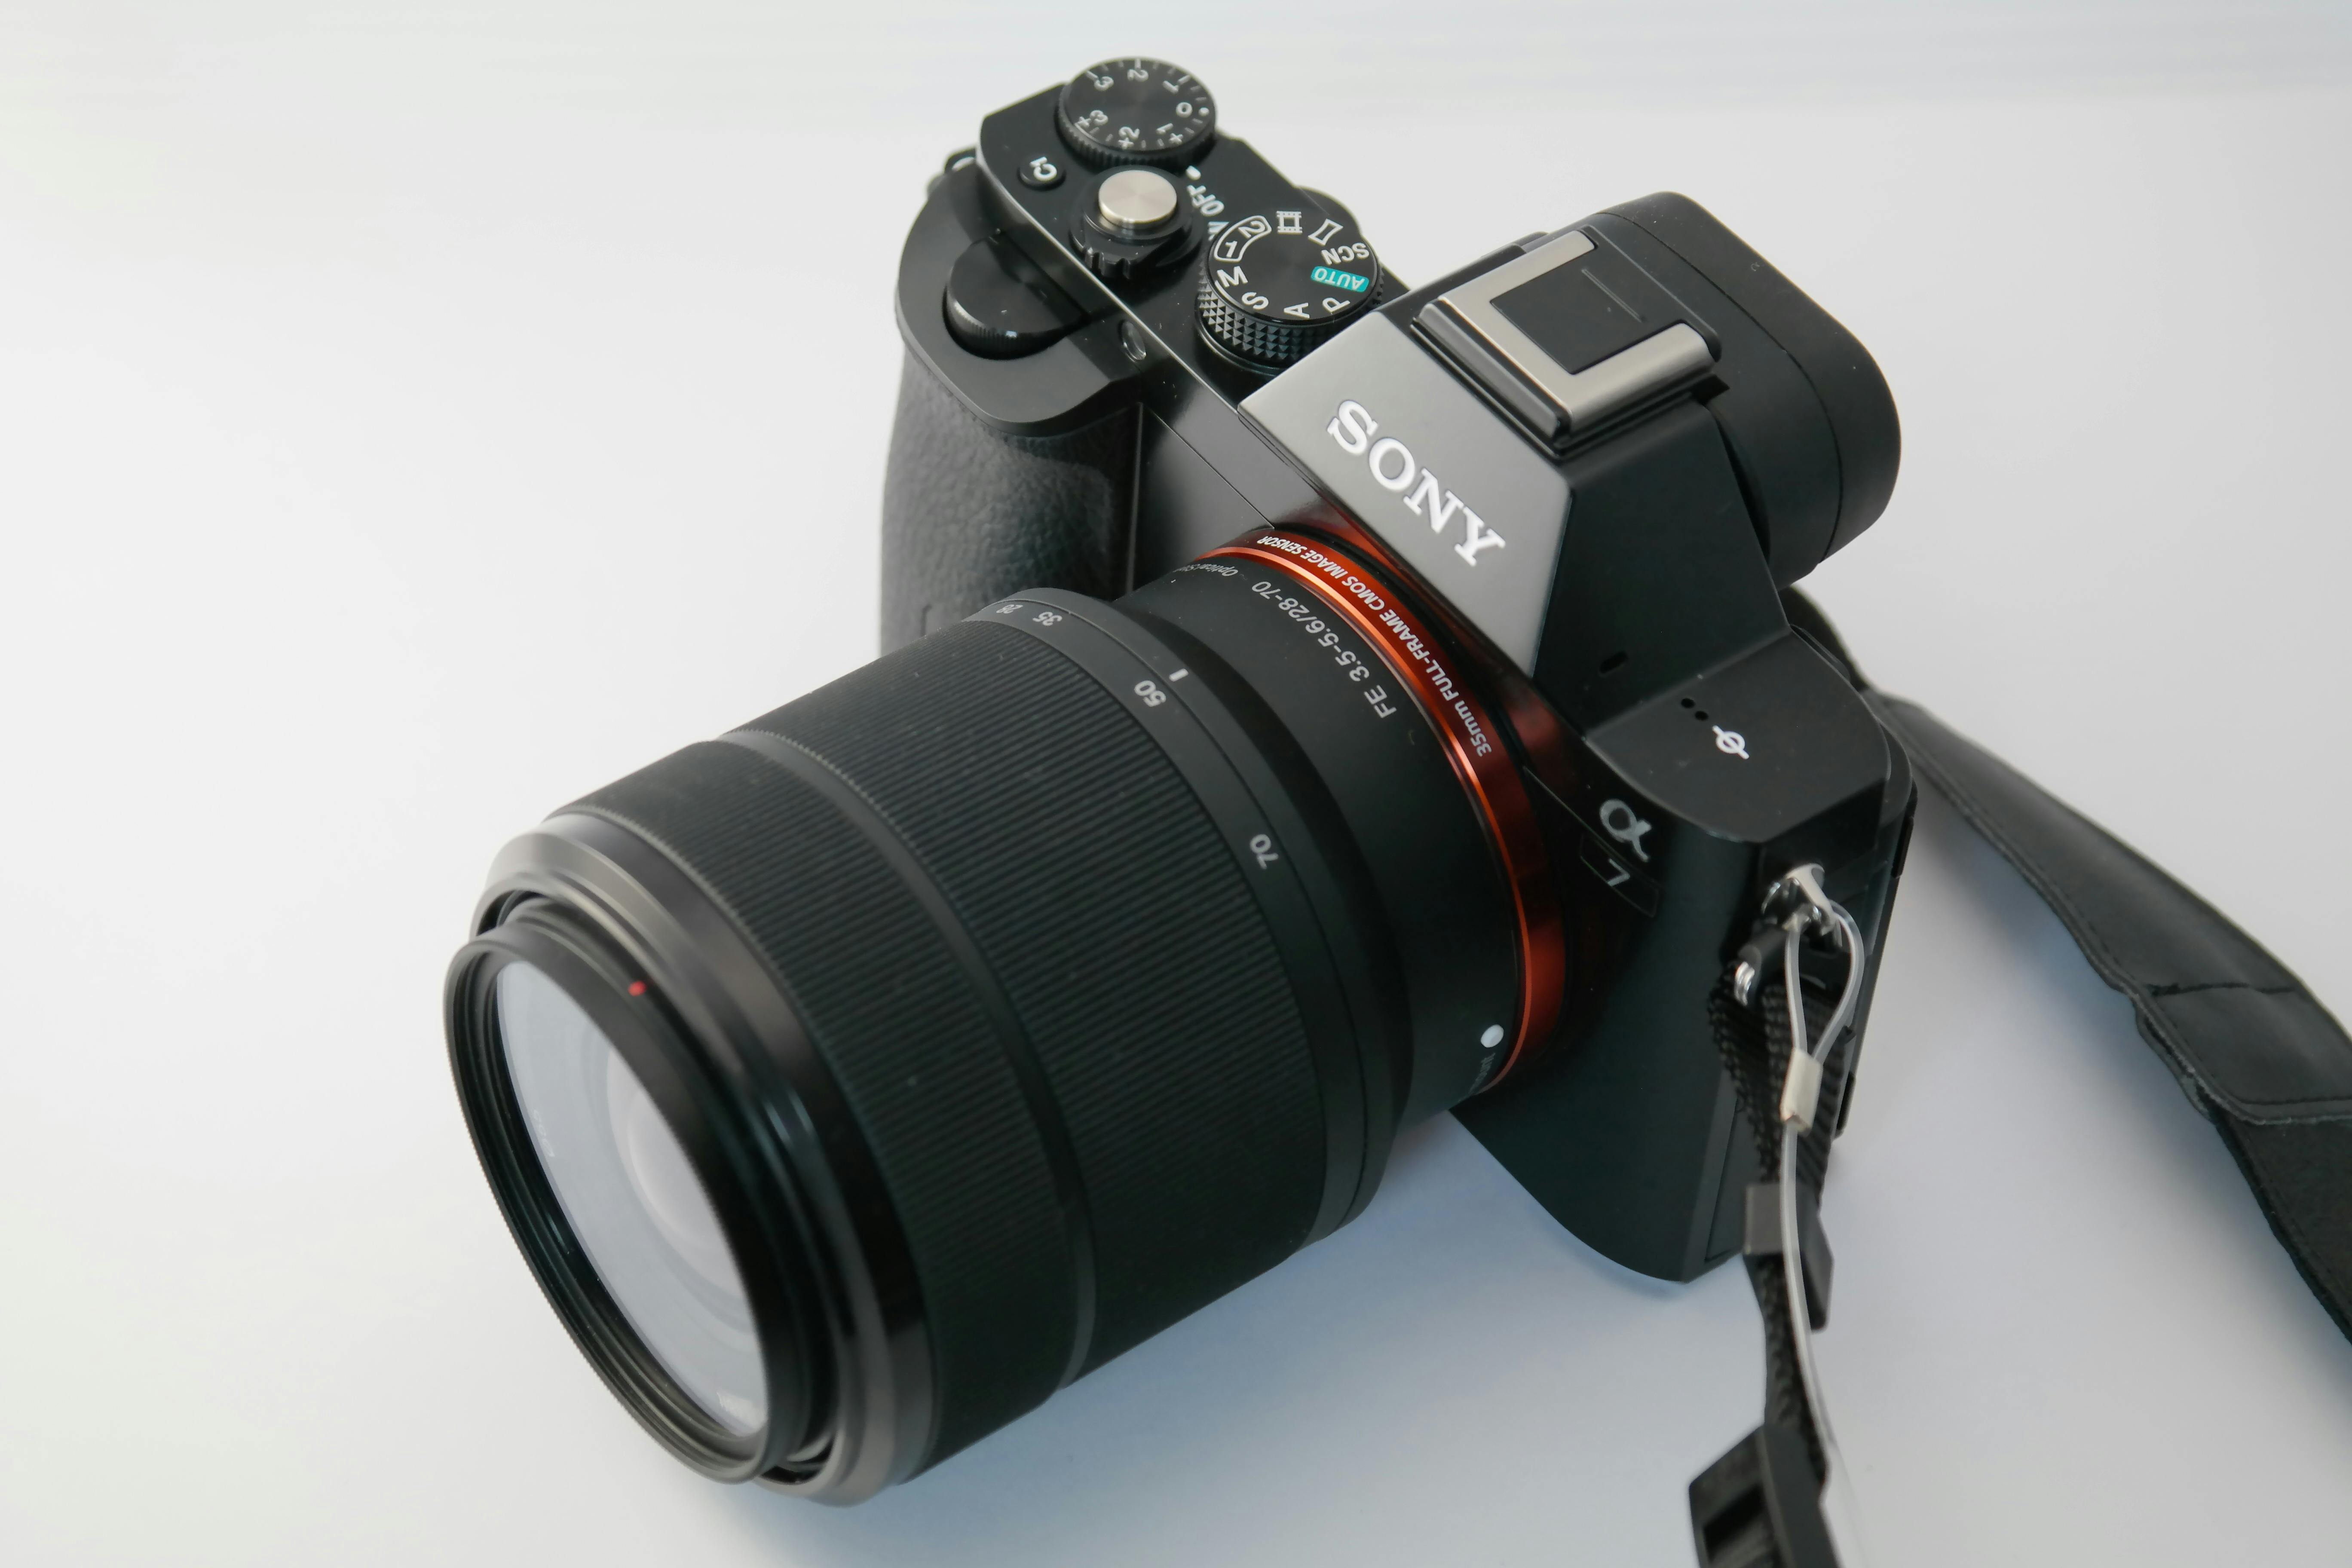 9 Recommended Accessories for Your New Sony a7R III or a7 III Camera